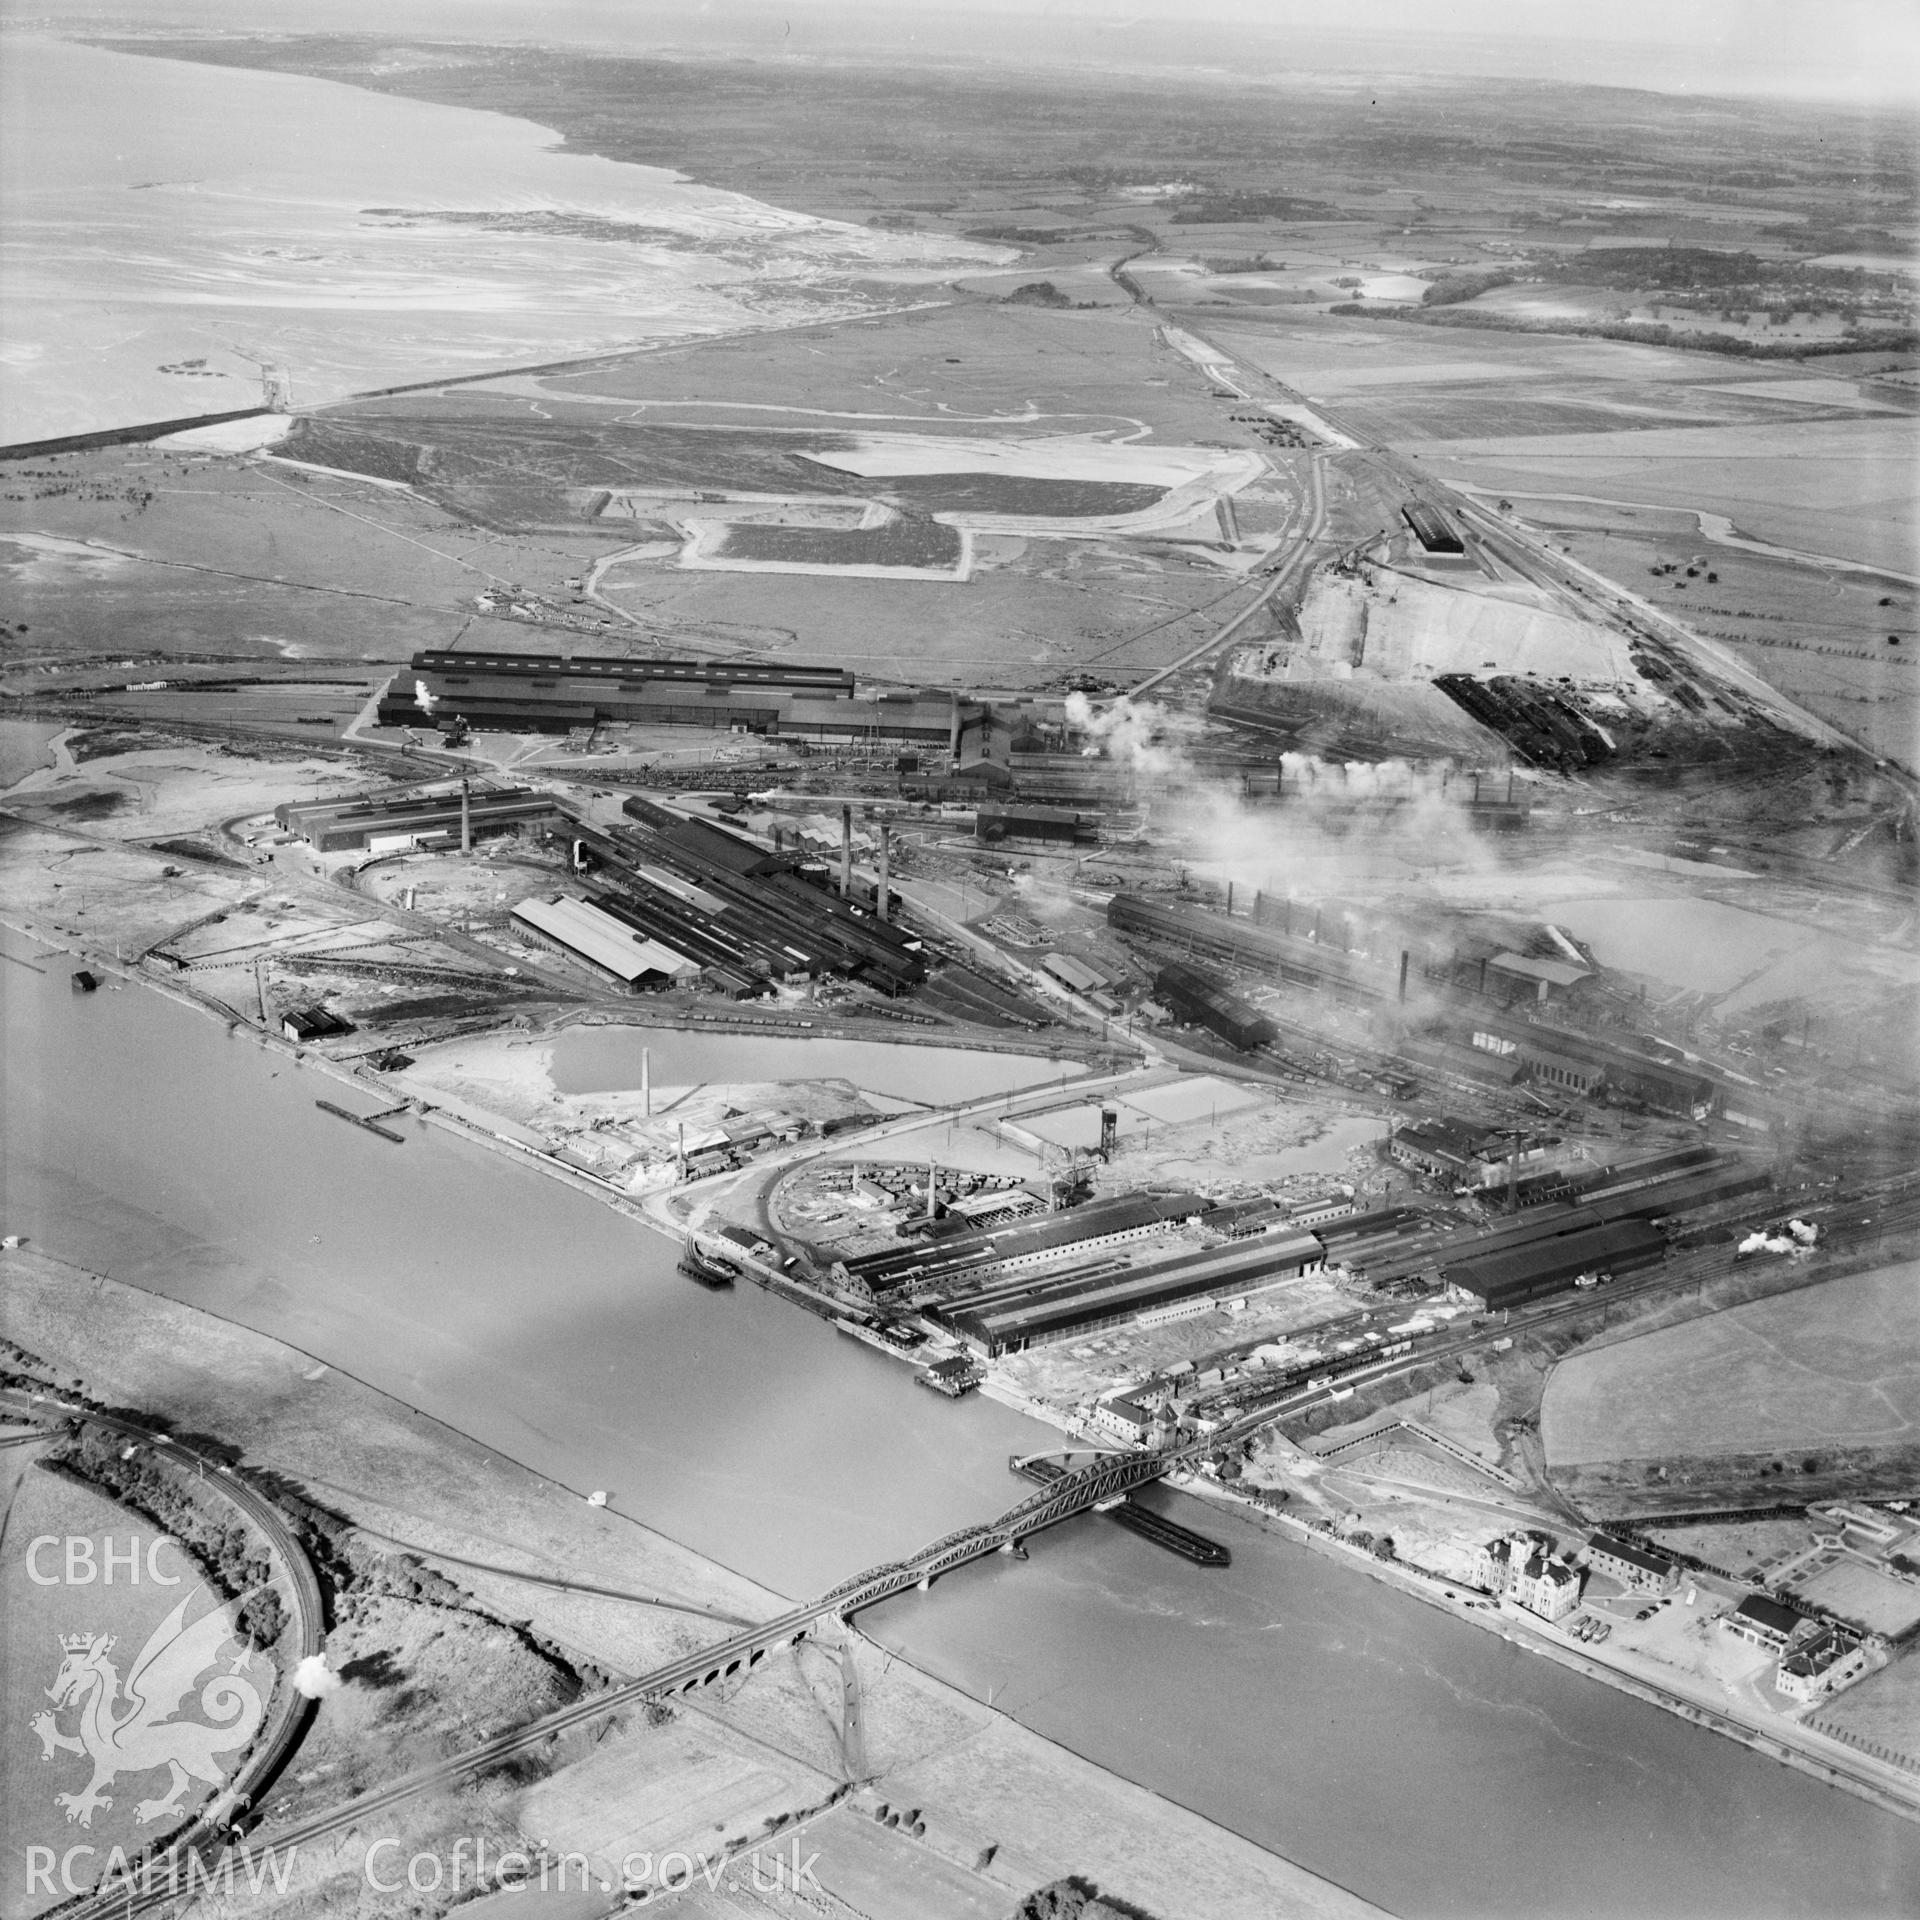 View of the Shotton steelworks site showing Hawarden Bridge (commissioned by Westminster Dredging Co.). Oblique aerial photograph, 5?" cut roll film.